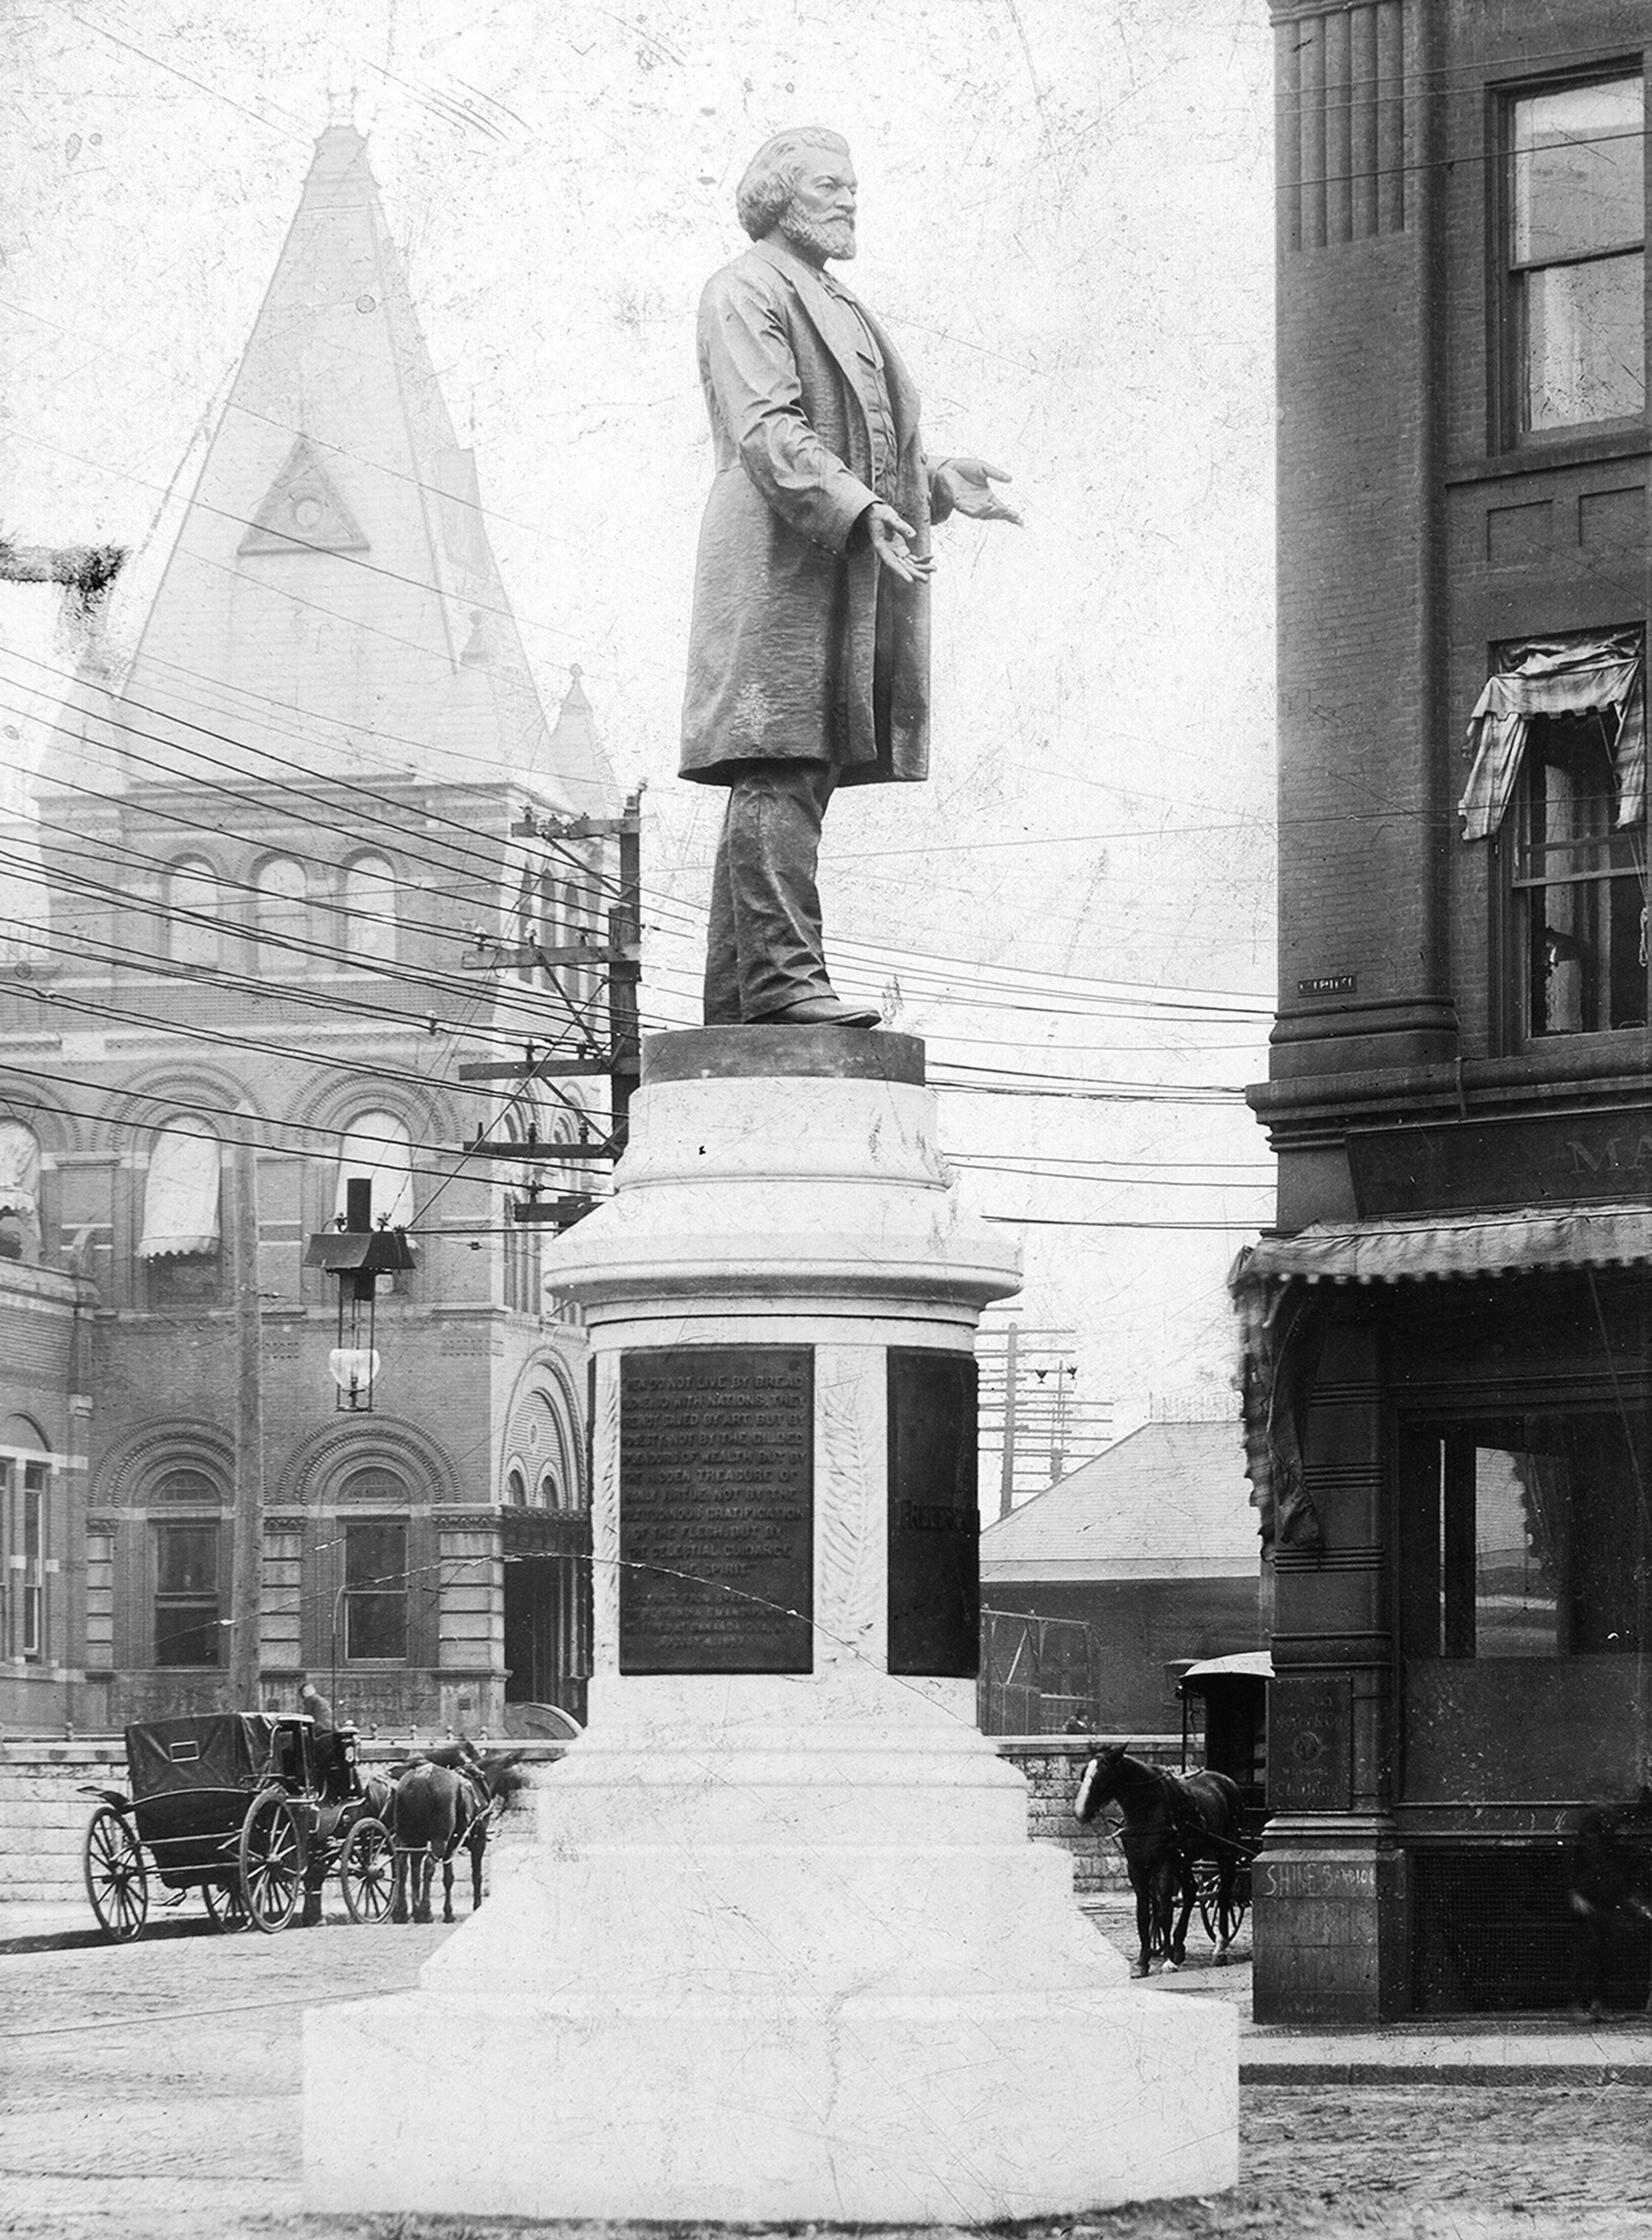 A monument built to honor Frederick Douglass, a statue of Douglass stands on top of a stone base in Rochester, New York, 1900. (Smith Collection/Gado/Getty Images)